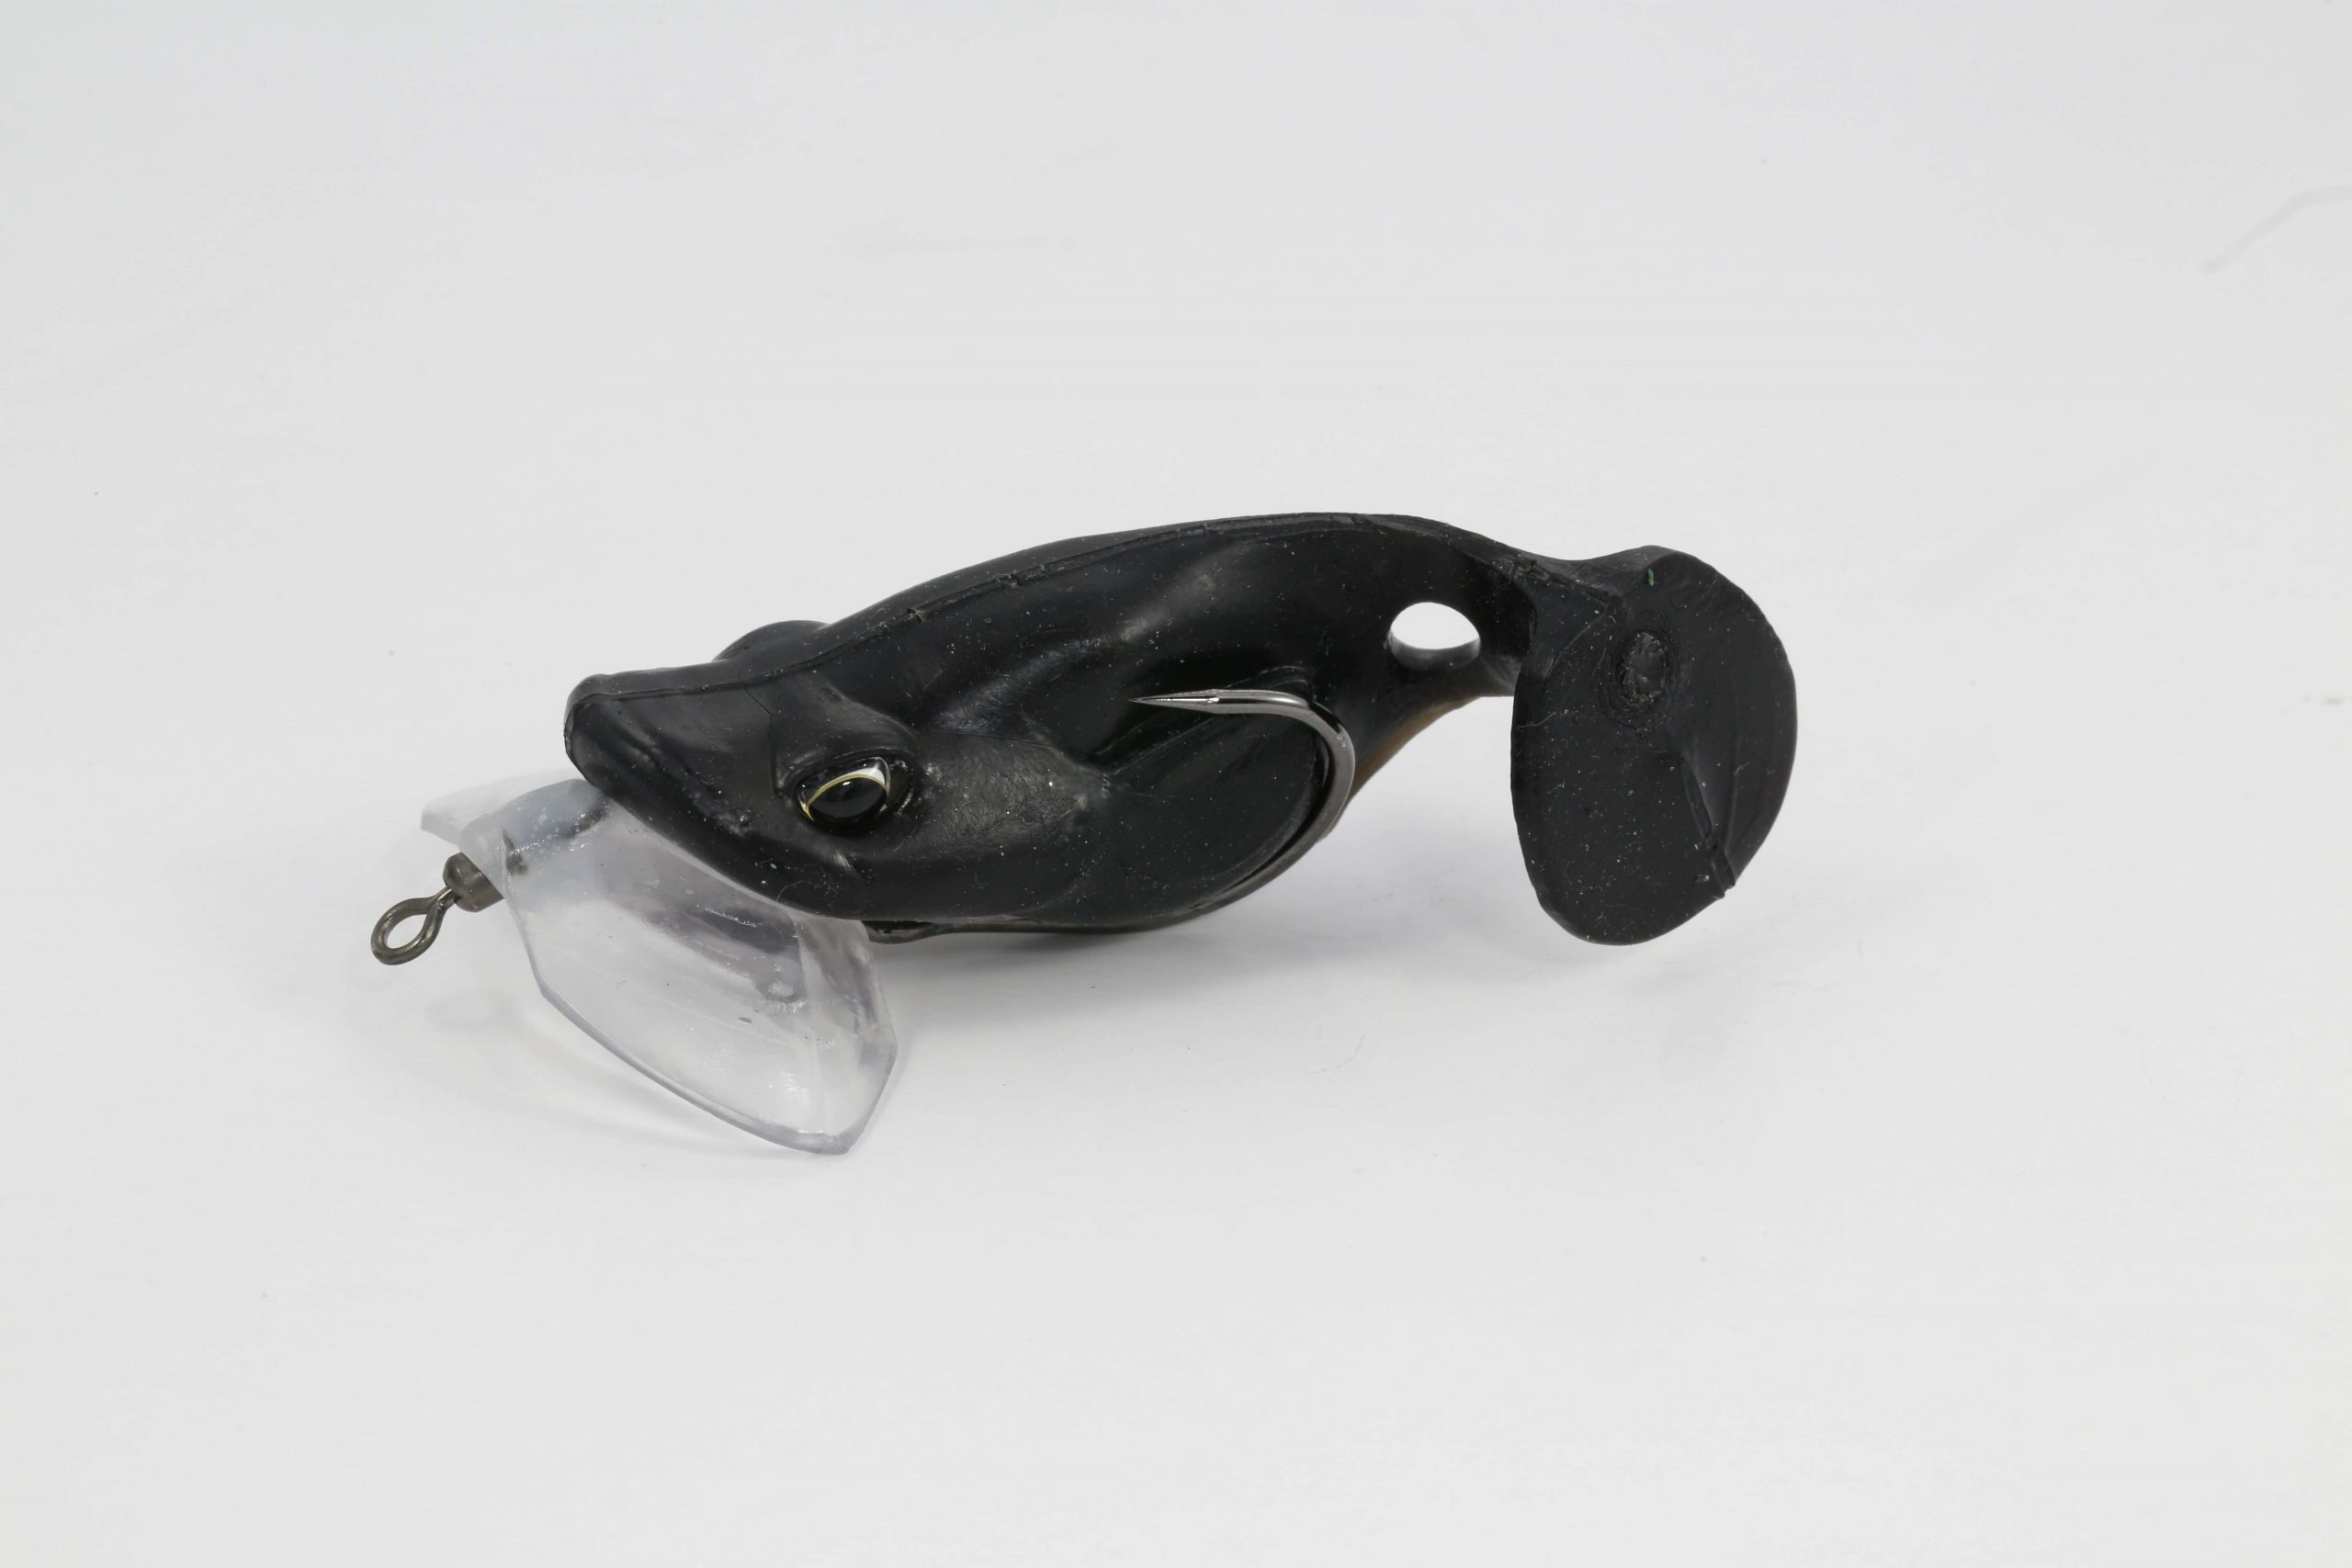 Namazu<br>	
Realis<br>	
$11.99<br>	
Looking for a niche bait?  The Namazu Frog is a top water sensation. Another Adachi R&D concept, the uses dual opposing actions which creates significant surface action. The crawler bill allows the lure to surface-walk and roll providing a wake that leaves the body. The rear region of the lure creates a faster turbulence as the lure moves forward by incorporating a thin perforated penny shape tail. The slower the lure is retrieved the more displacement. Unlike many top water lures the Namazu utilizes a soft tapering body that works to hide the dual hooks from vegetation, Yet the body will compress once taken allowing the hooks to penetrate.  The unique and compact Namazu is like having the best of both worlds a grass or open water bait that will give top water anglers more in their arsenal.
